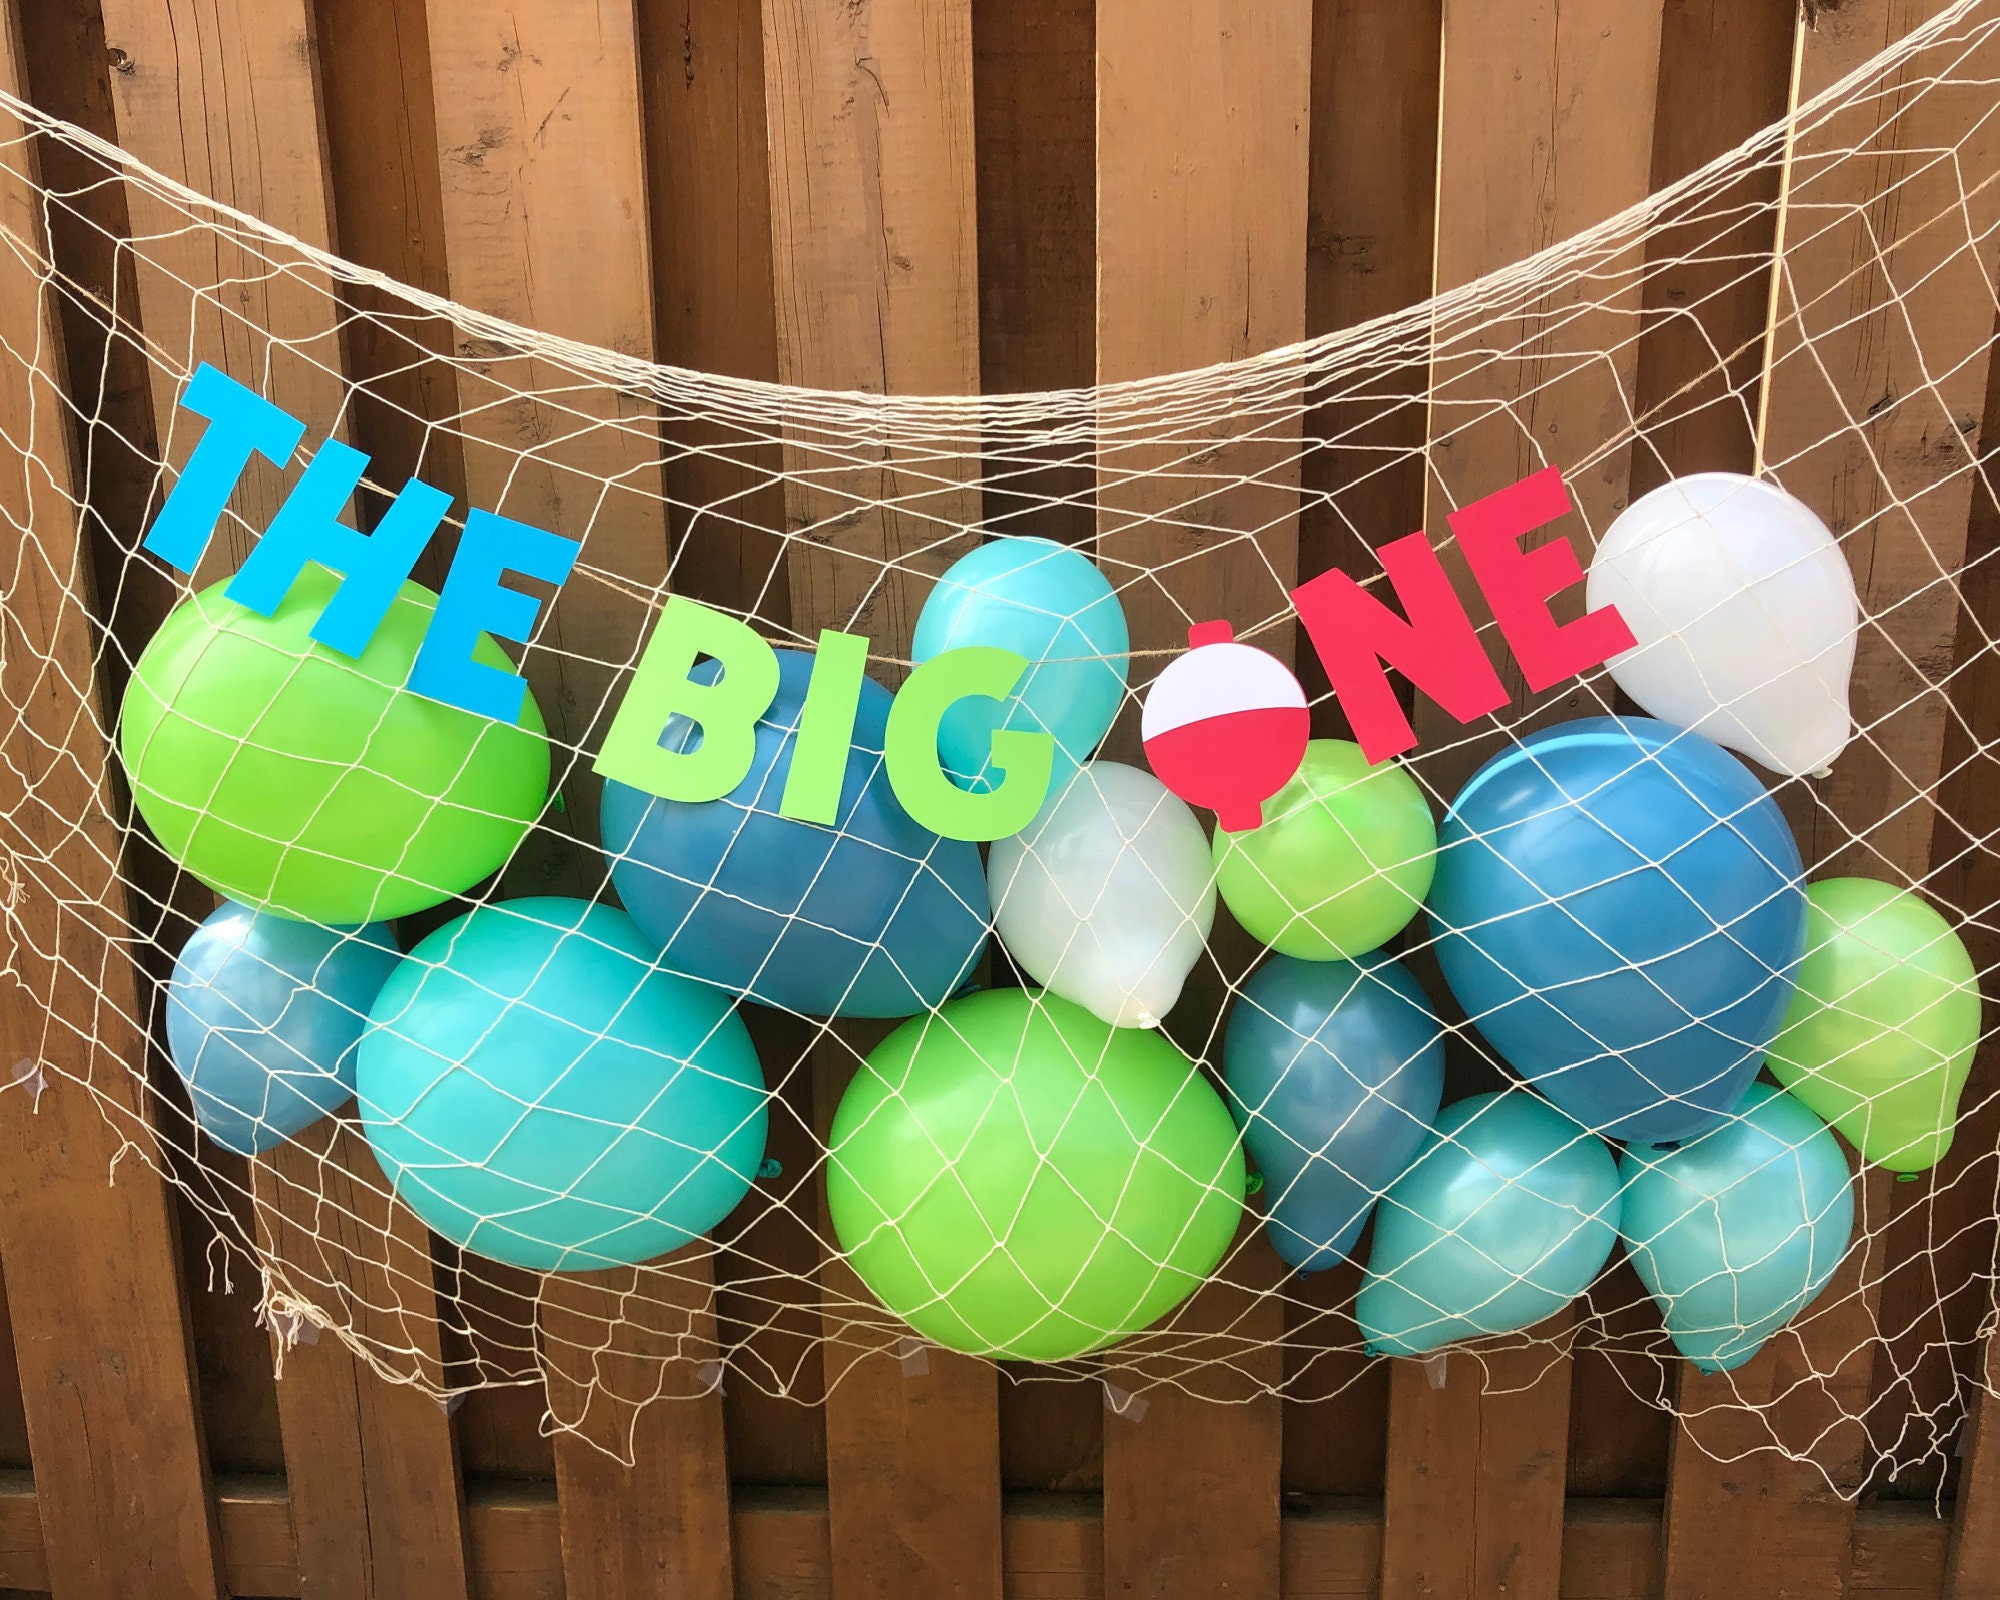 The Big One Balloon Party Backdrop O-fish-ally One Birthday Party